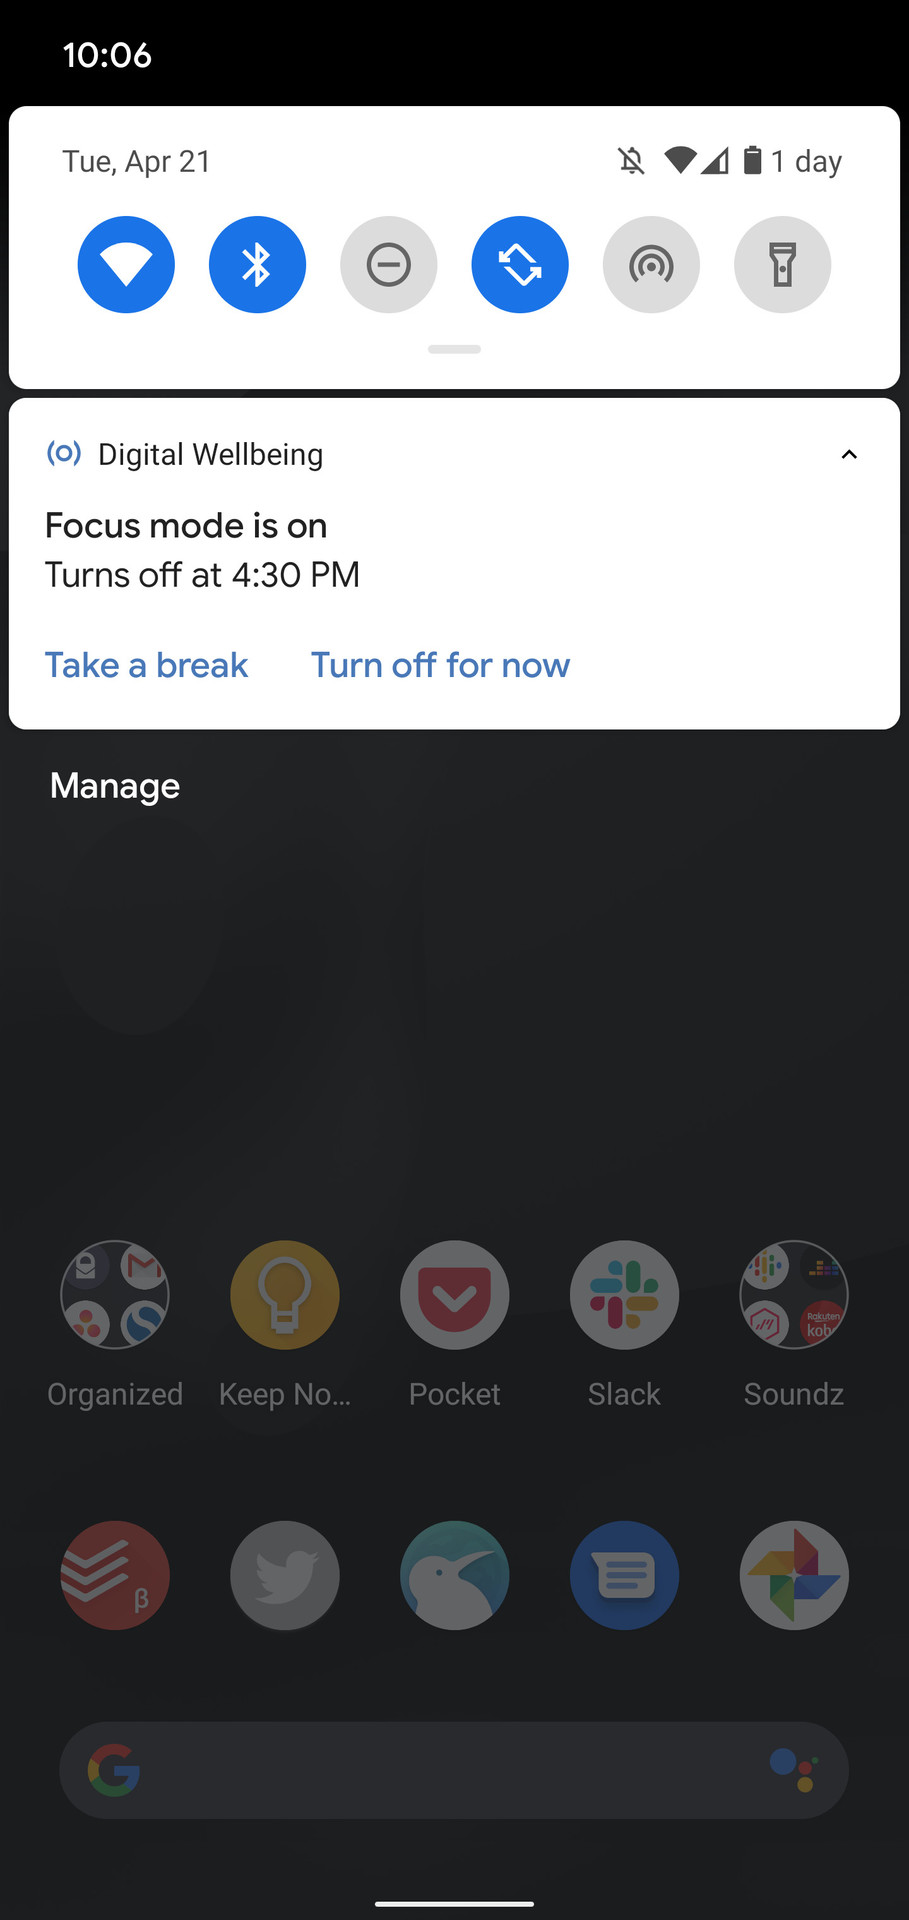 Digital Wellbeing refresh bed time mode 3